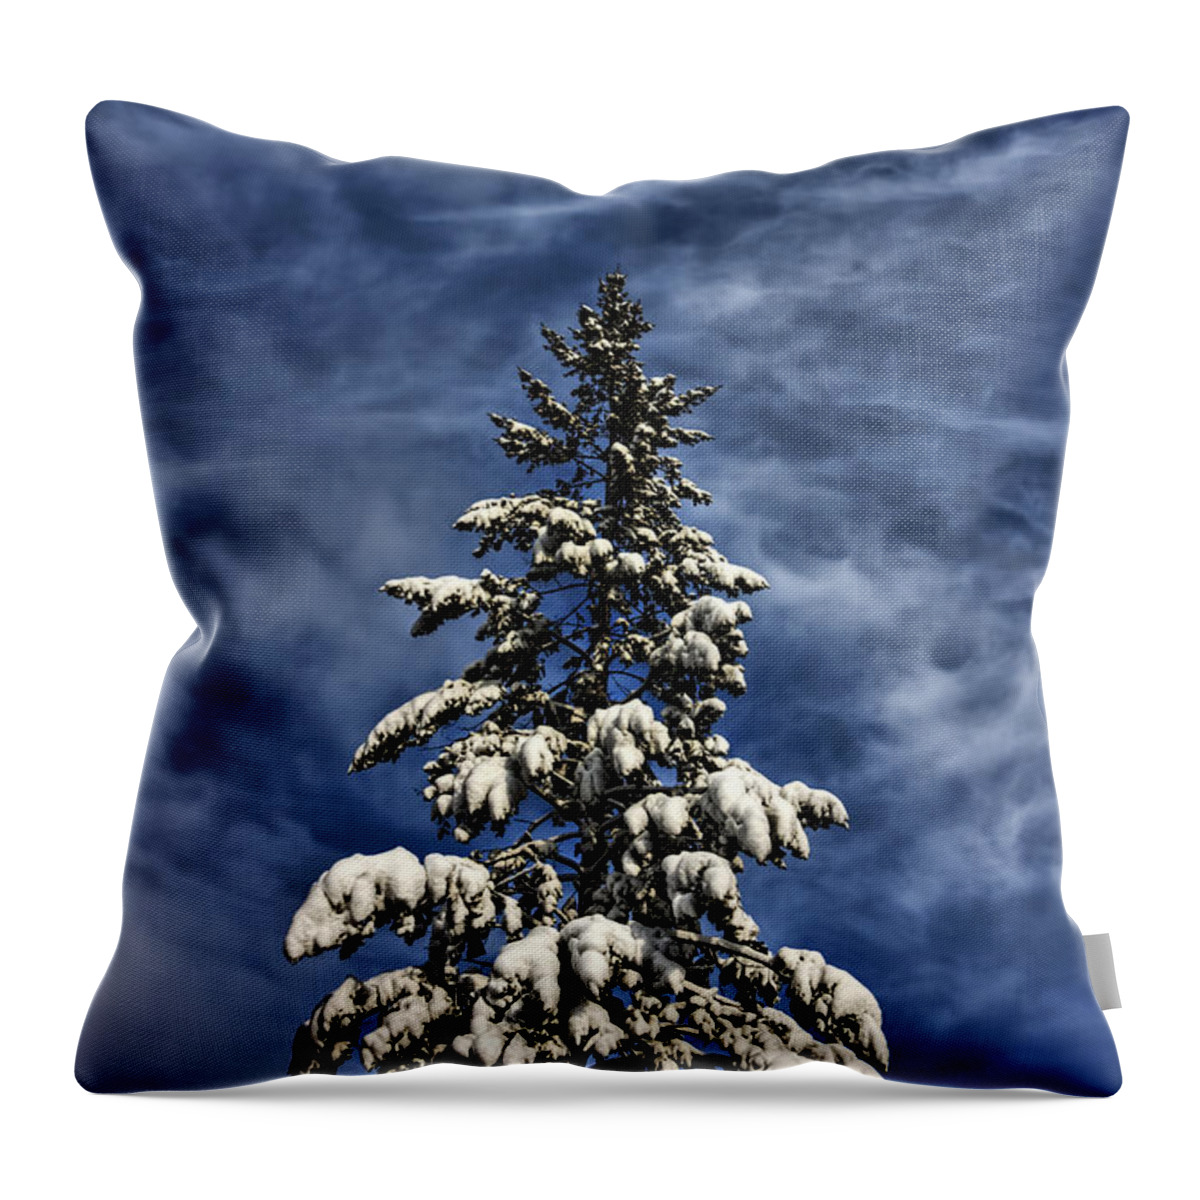 Spruce Throw Pillow featuring the photograph To Blue Horizons by Evelina Kremsdorf